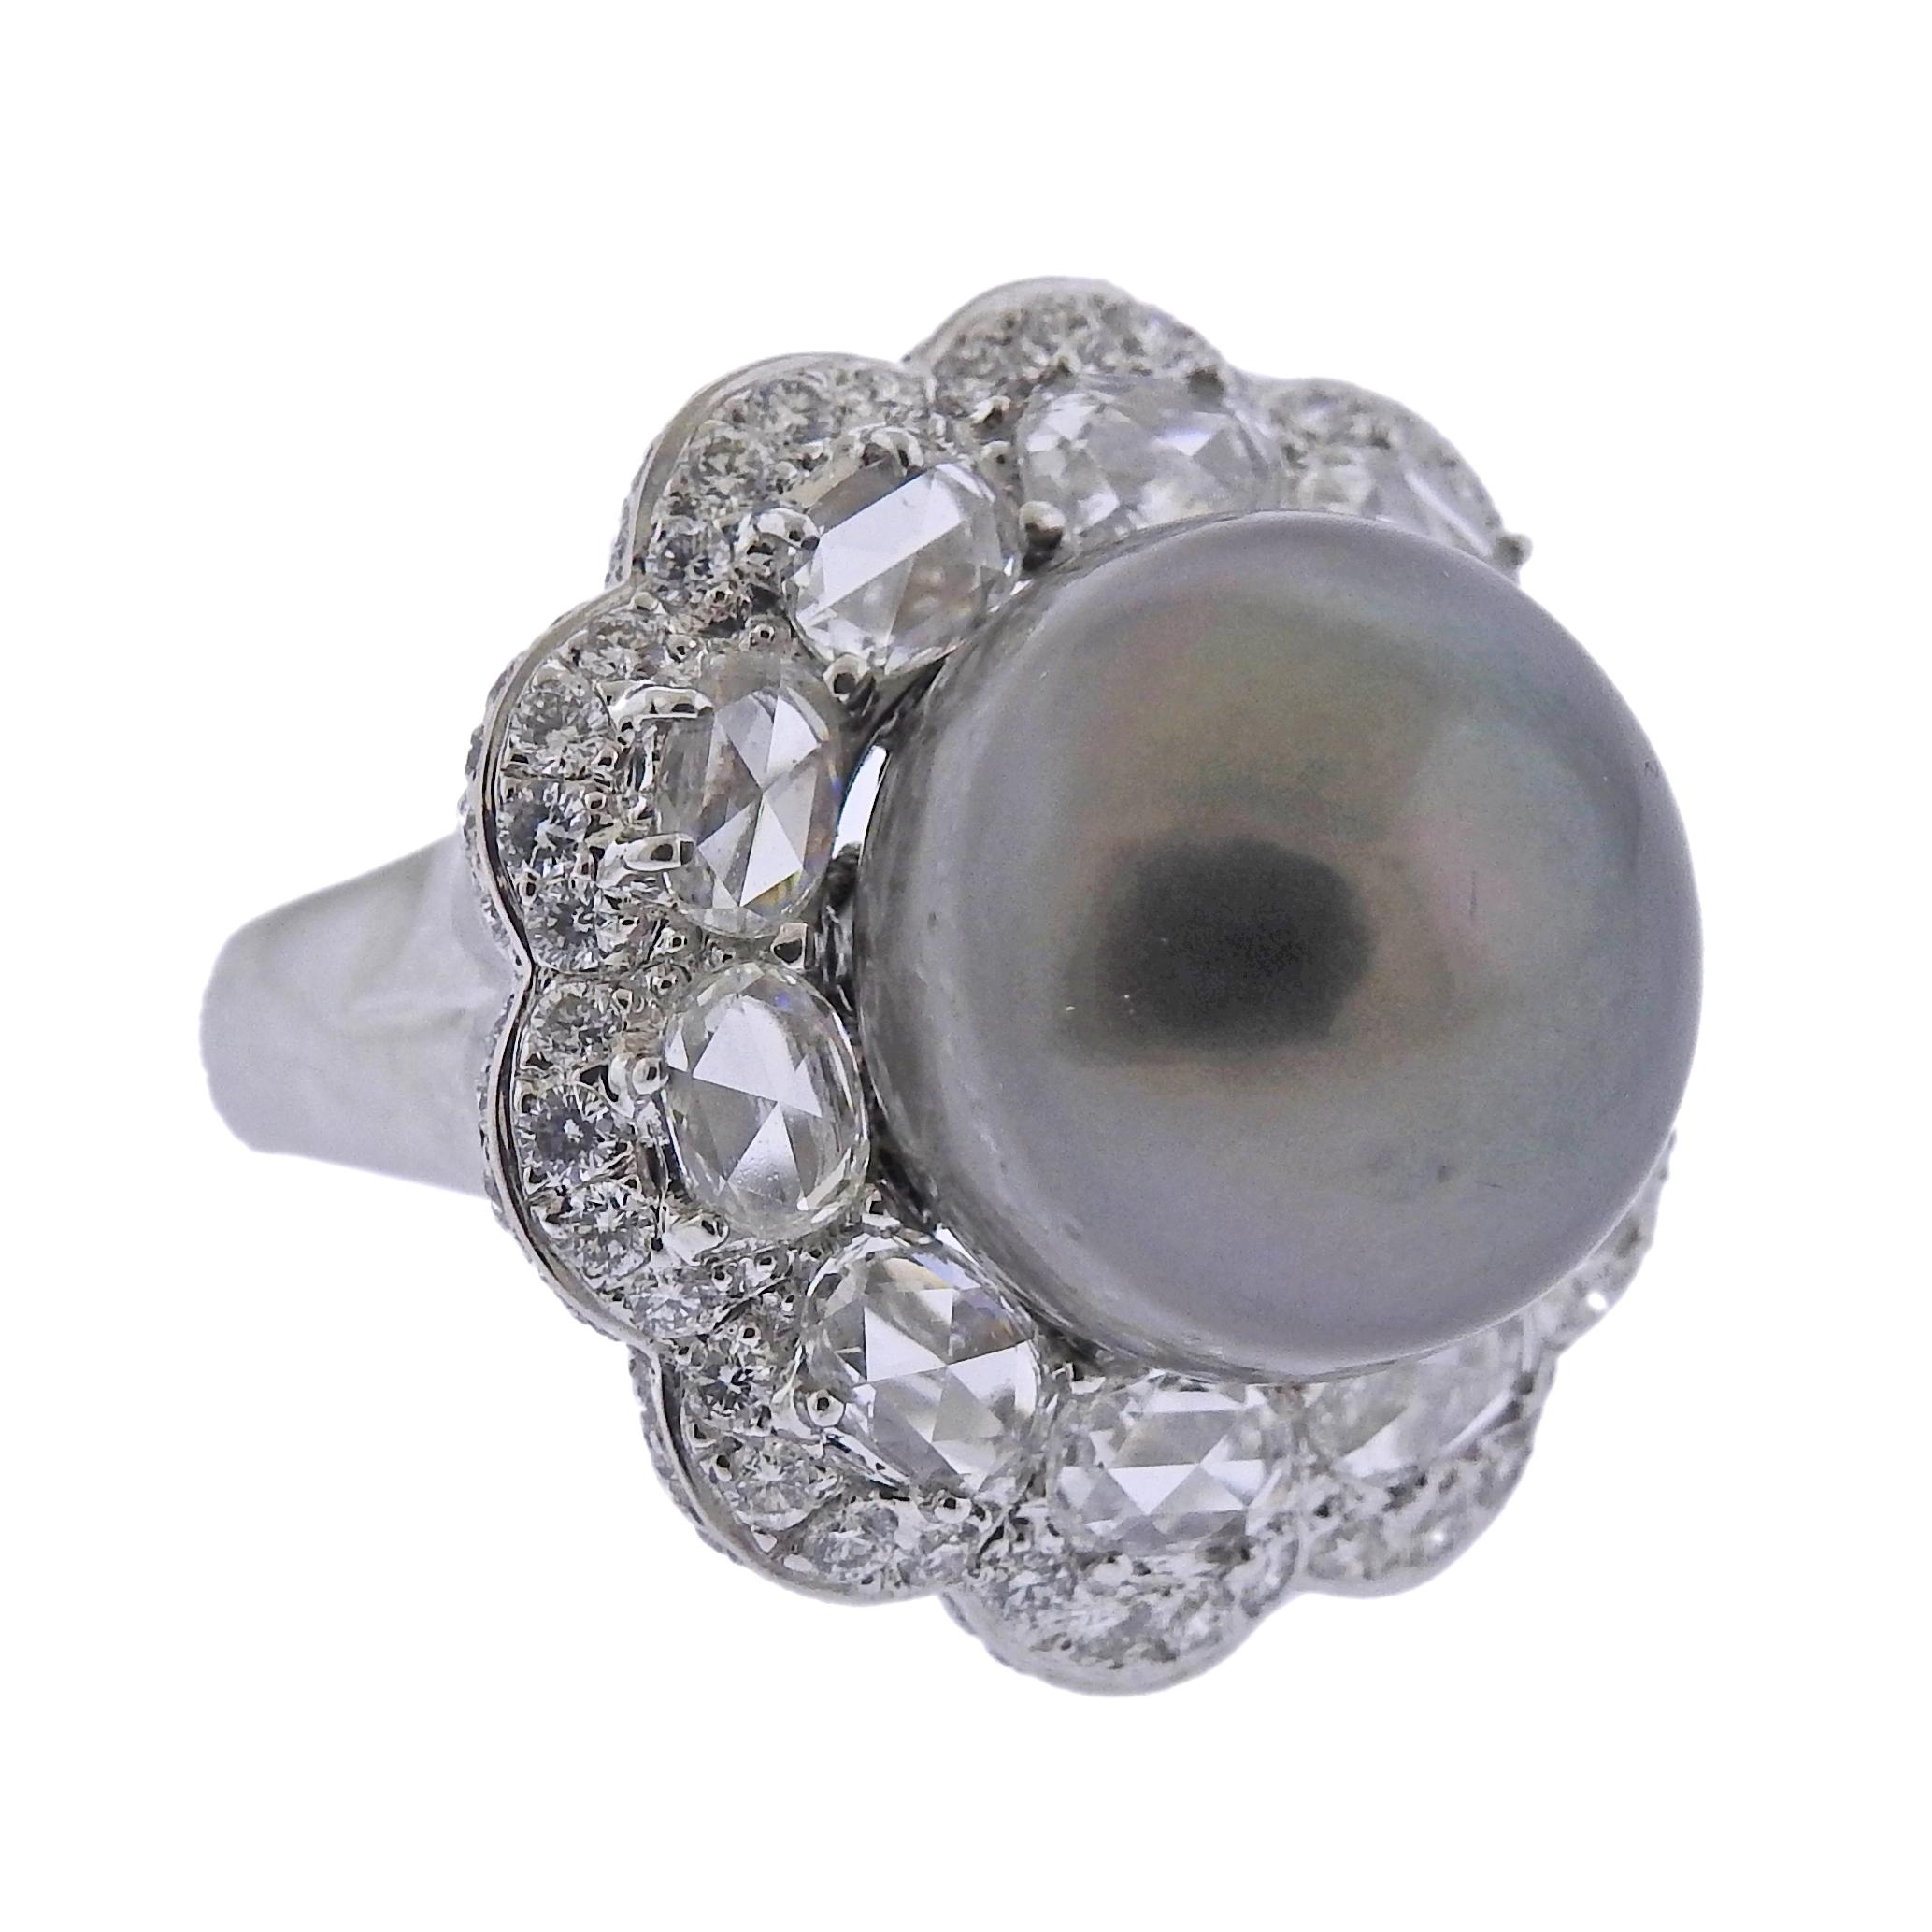 Large 18k white gold cocktail ring by Assael, brand new without tag. With 15.8 x 14.6mm Tahitian South Sea pearl and 4.01ctw in G/VS diamonds.  Retail $23000. Come with pouch. Ring size 7.5, top measures 24mm in diameter. Weight - 18.1 grams.